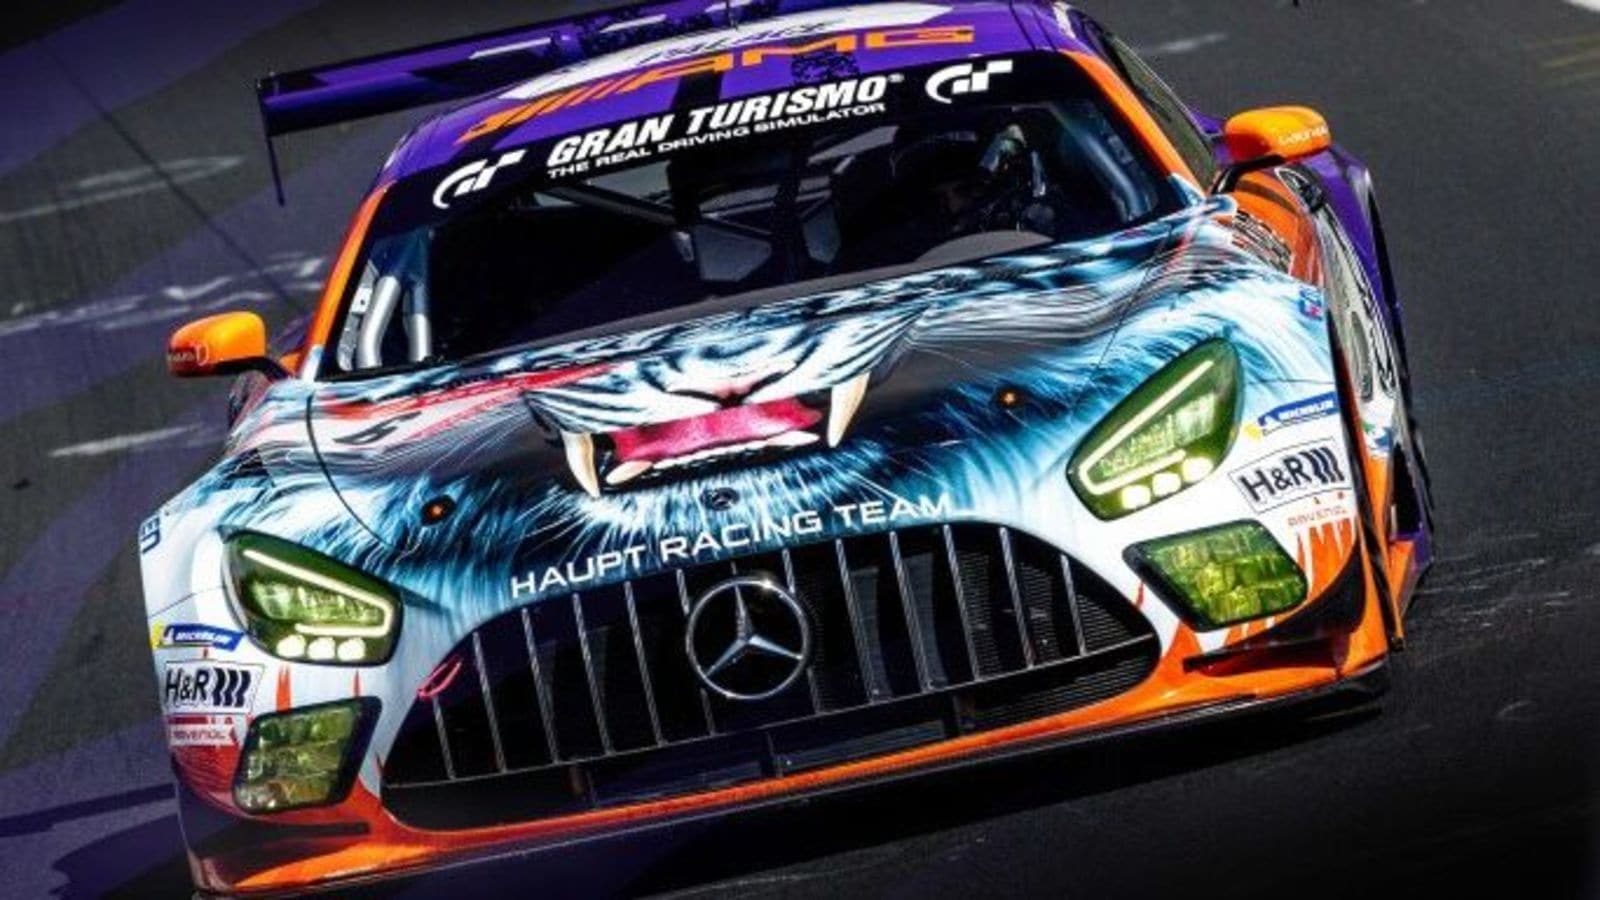 Mercedes AMG partners Palace to create one off car livery